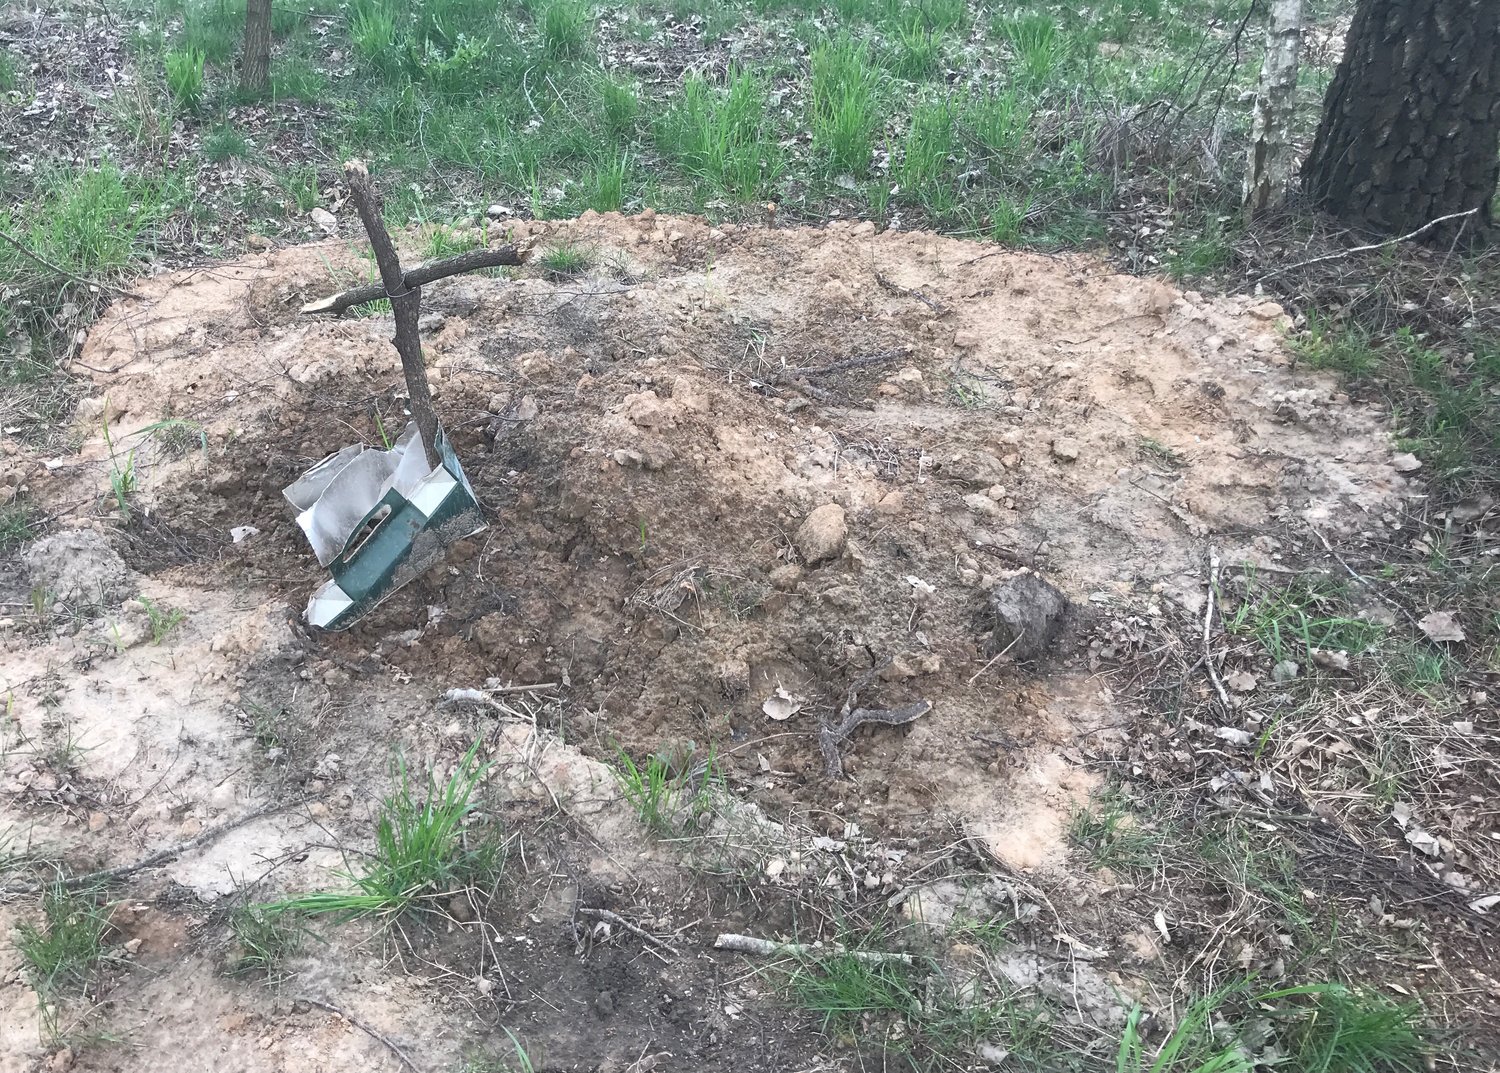 Russian soldier’s makeshift grave near Chernihiv, about 50 feet away from the tank turret